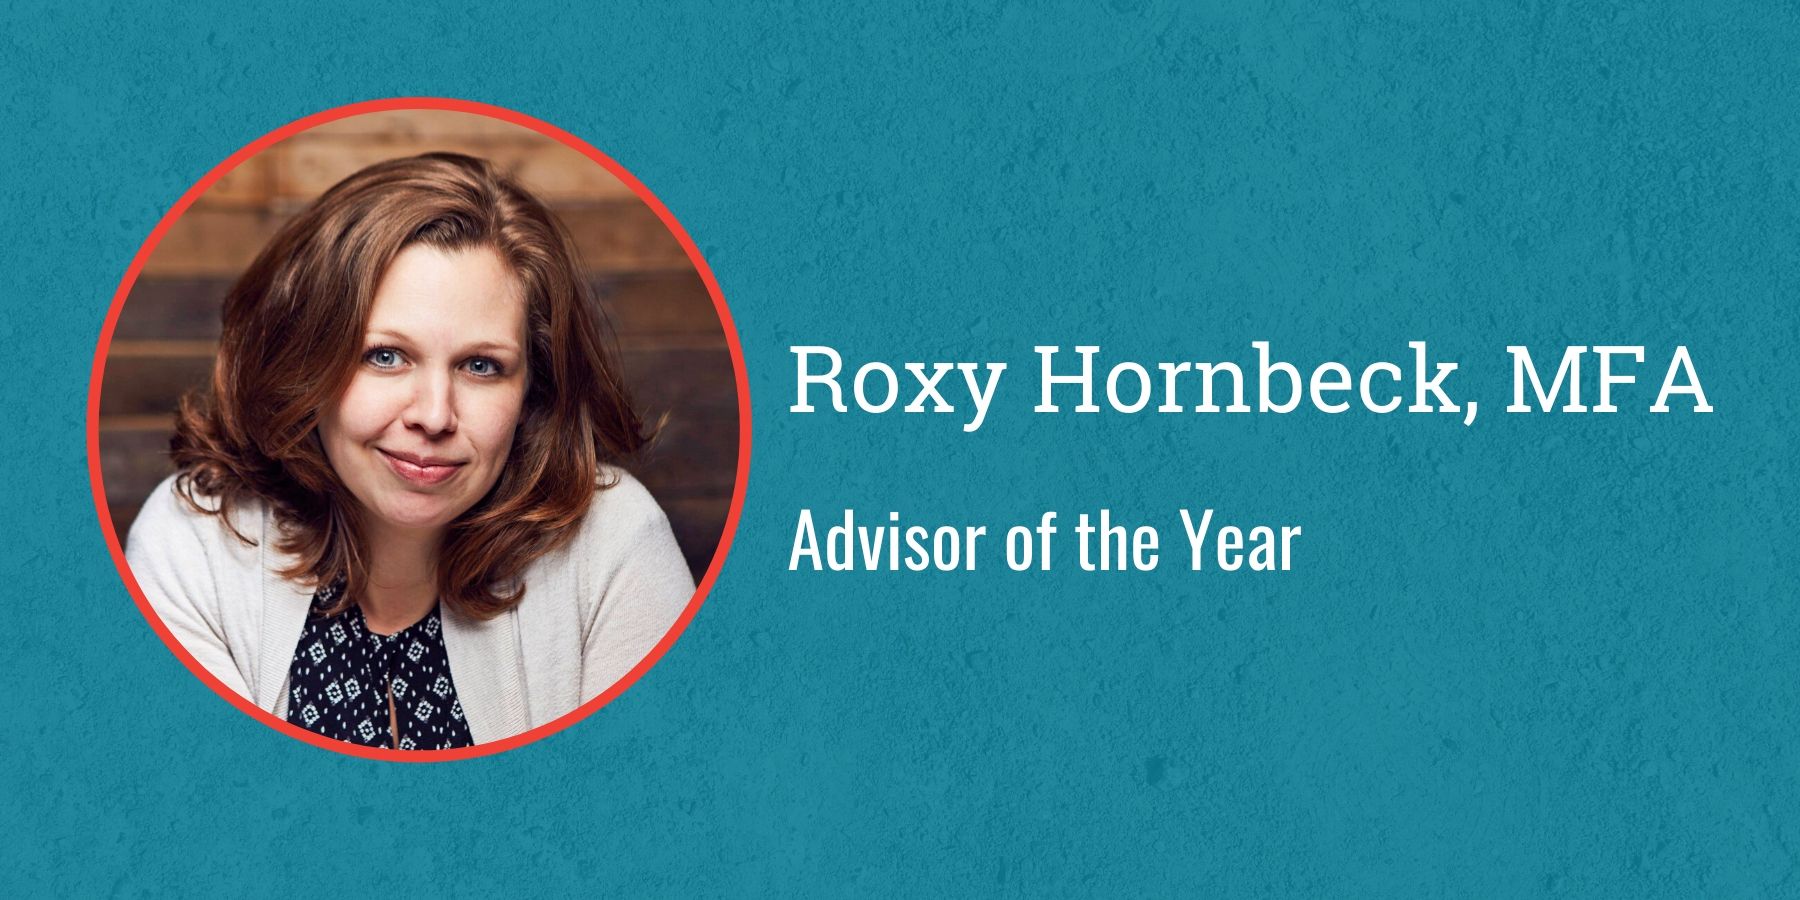 Photo of Roxy Hornbeck and text Advisory of the Year